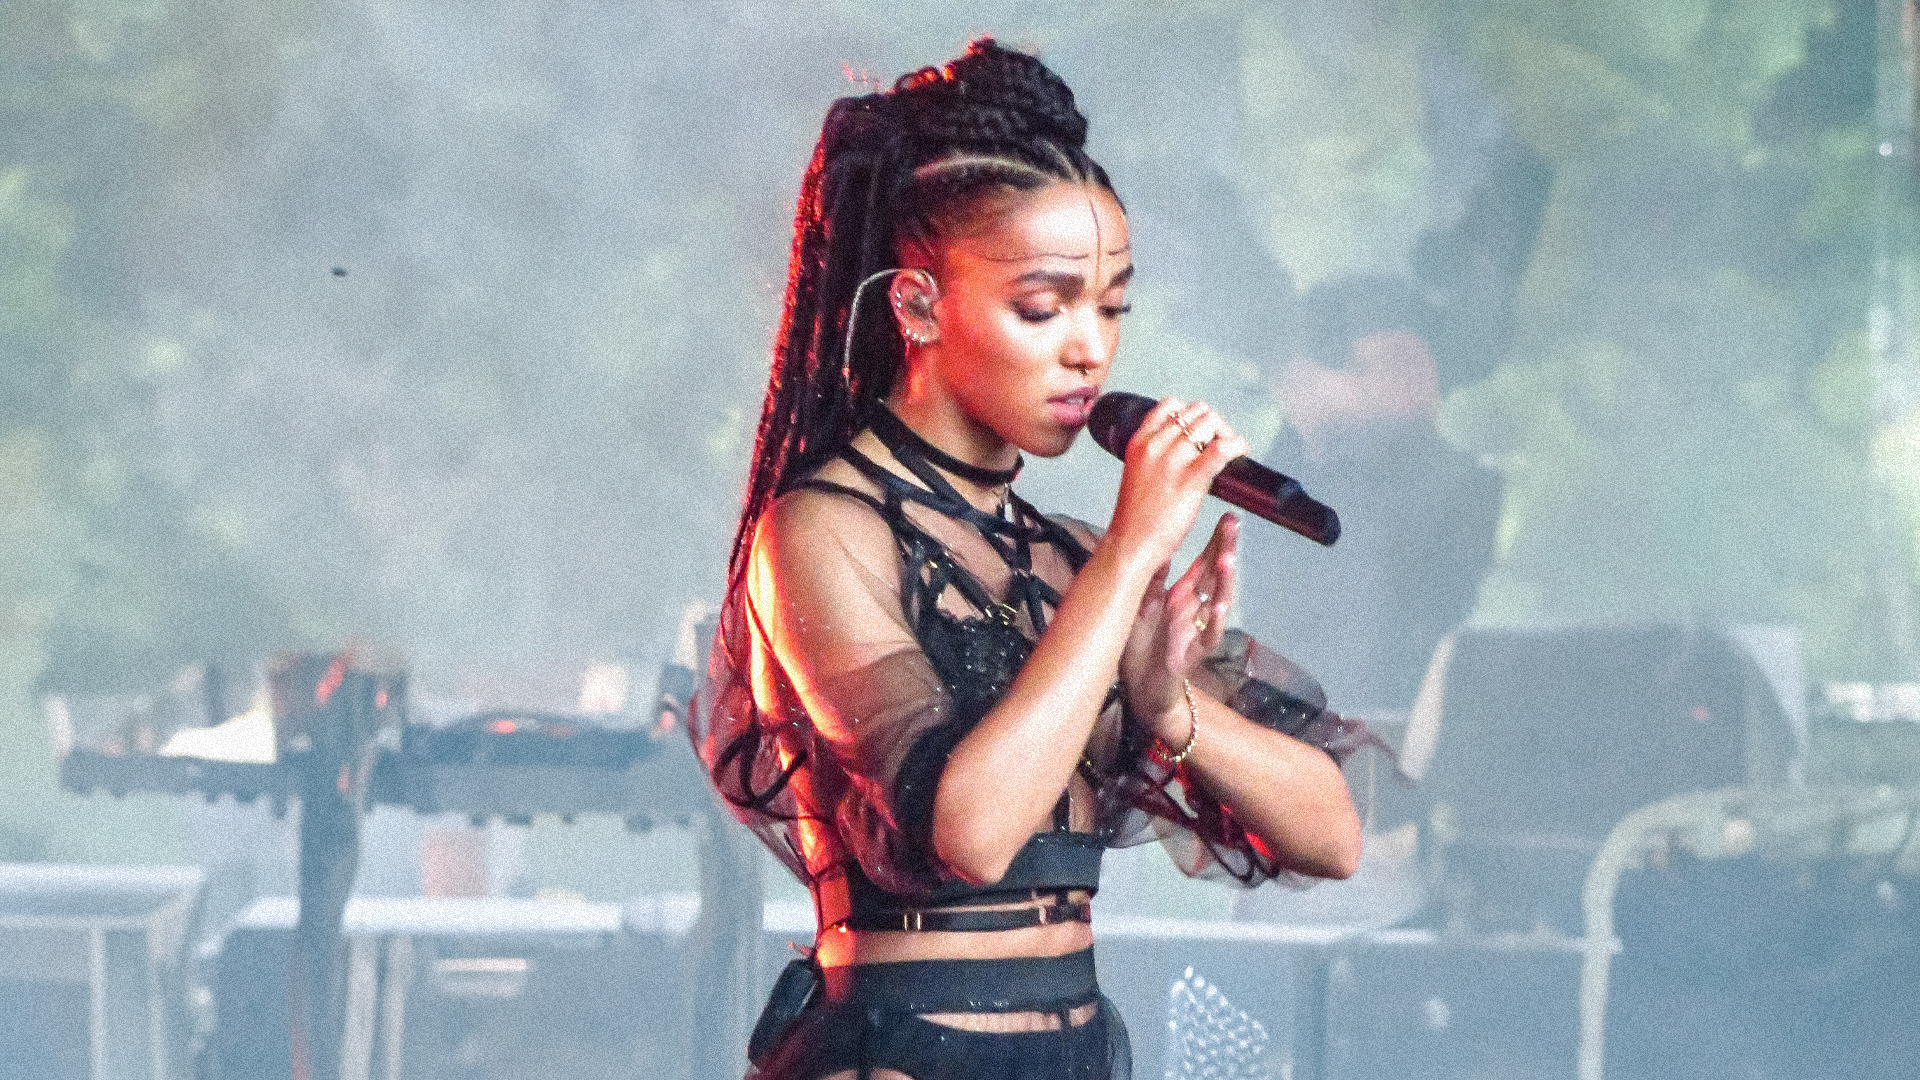 Opinion – FKA Twigs proves AI can empower artists